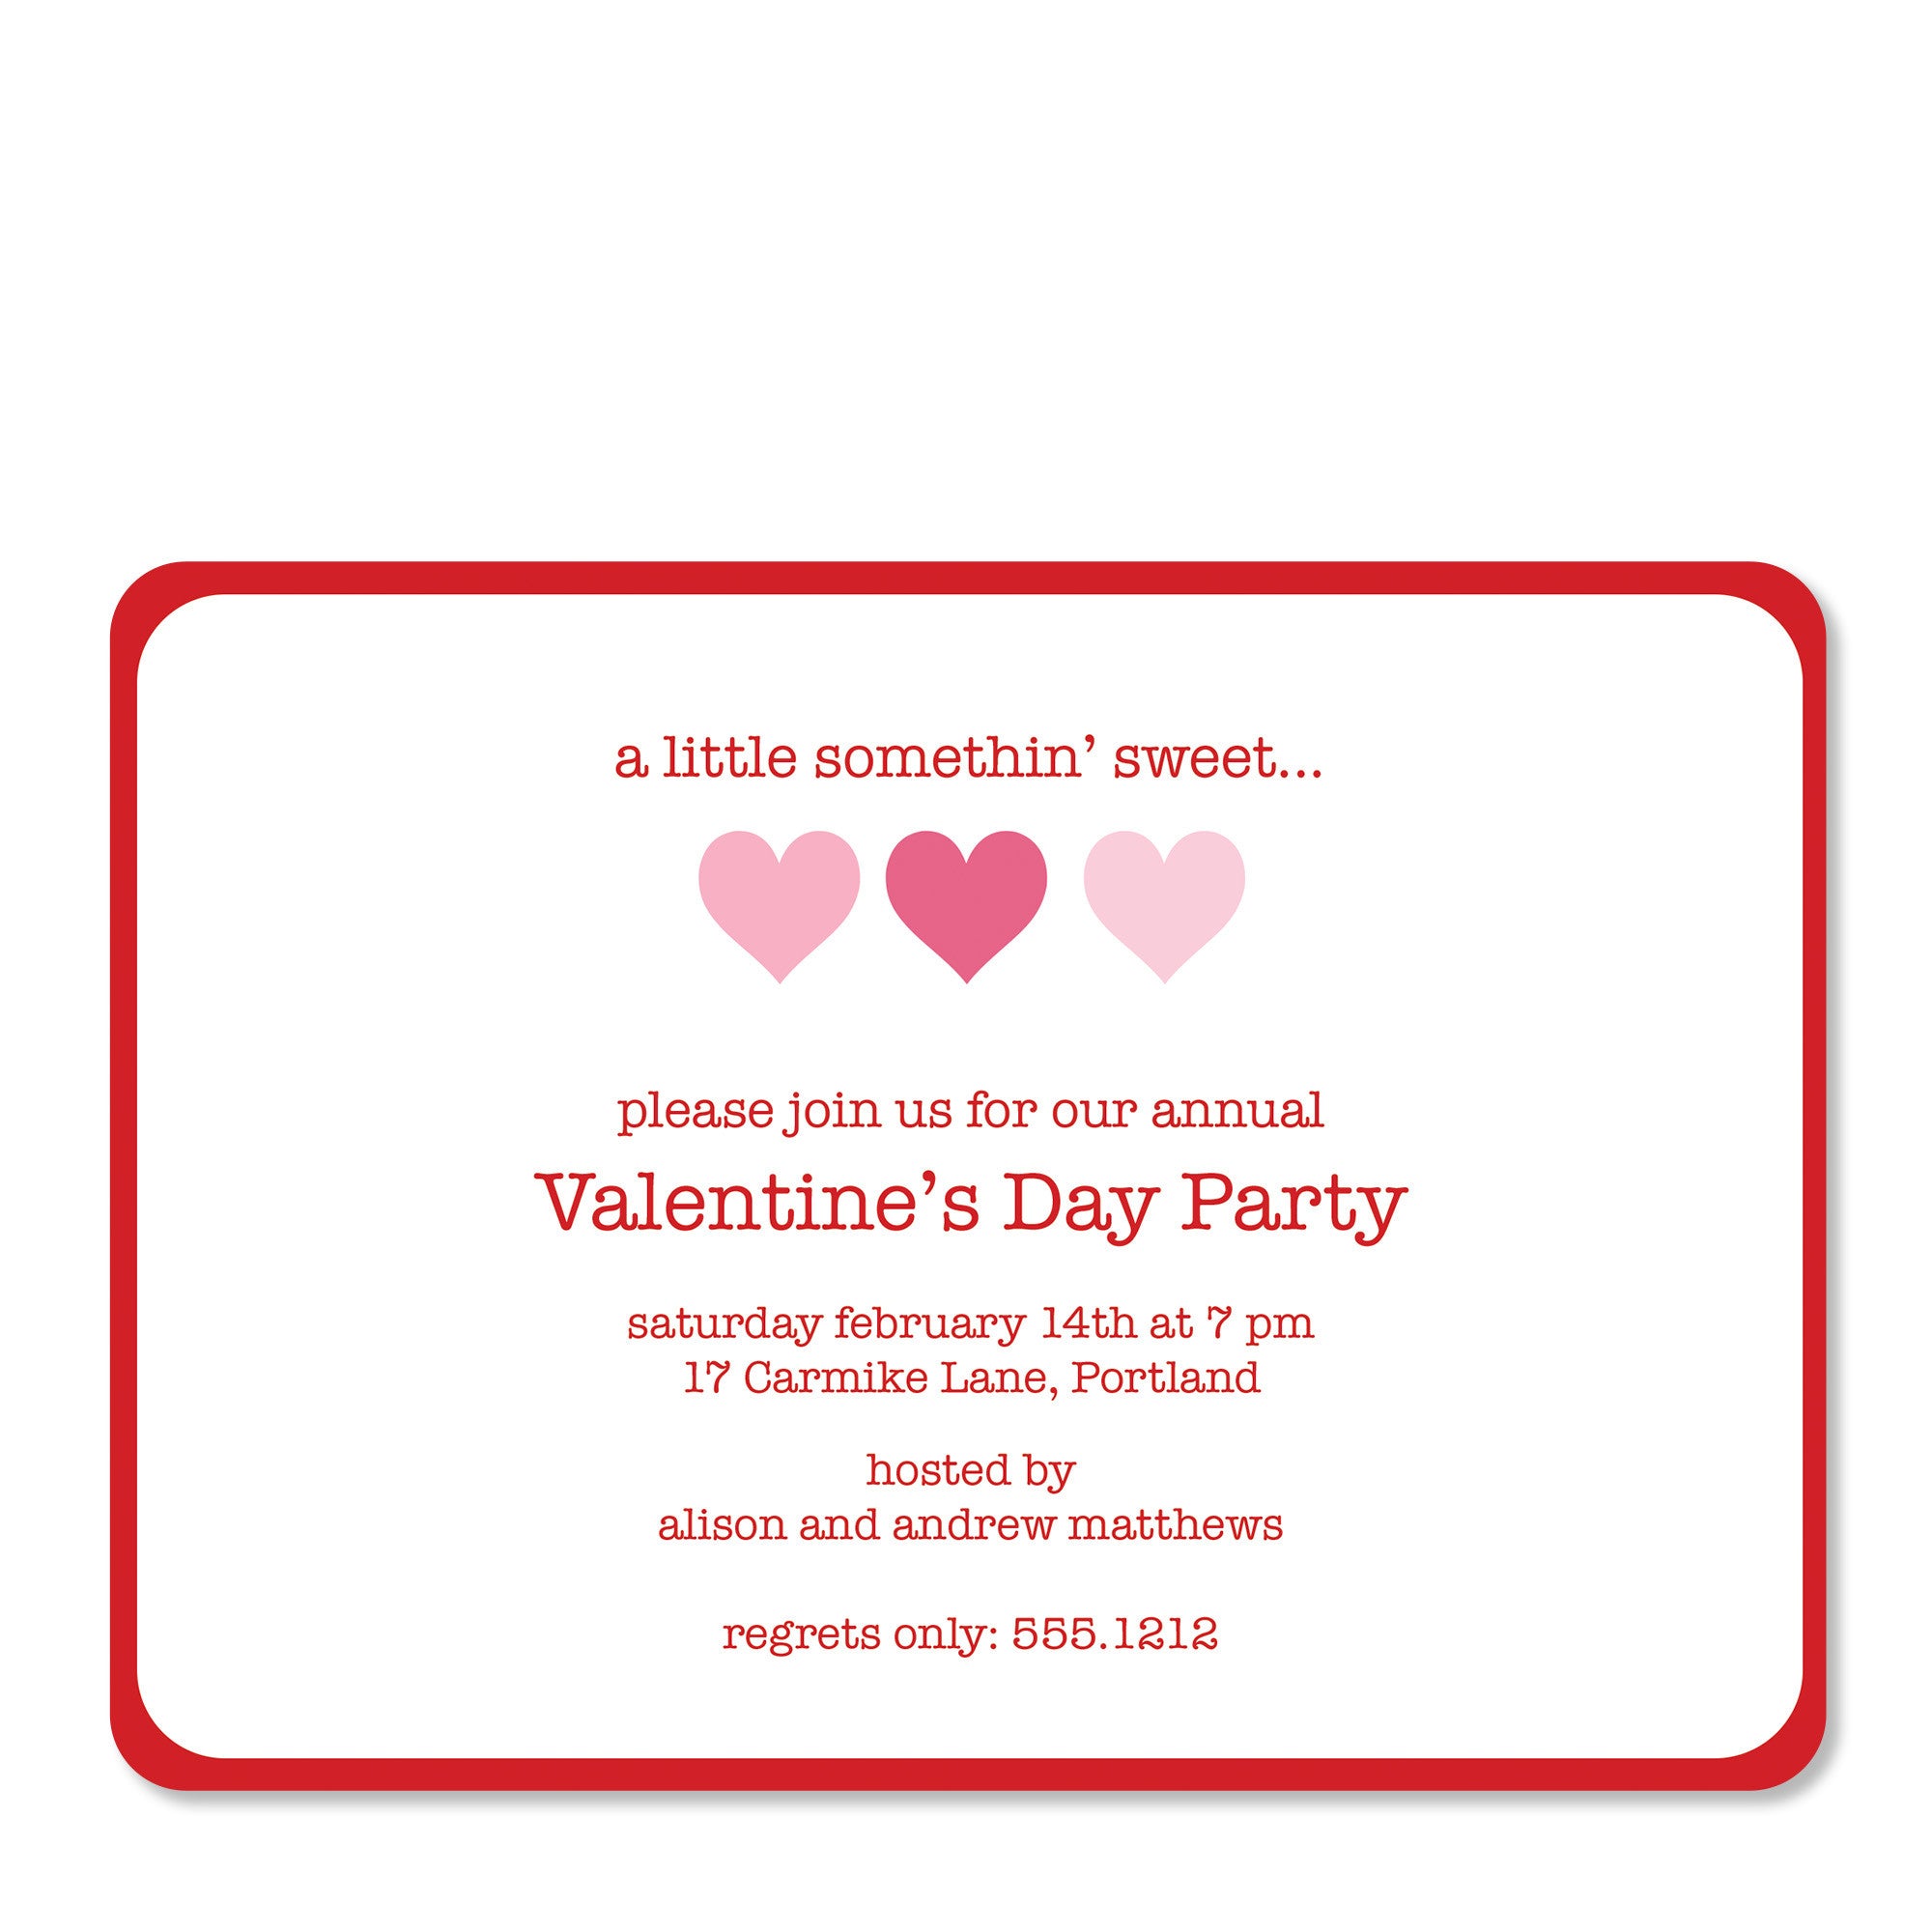 Valentine's Day Invitation, Printed on Heavy Cardstock, Design with 3 simple hearts, Pipsy.com (front view)